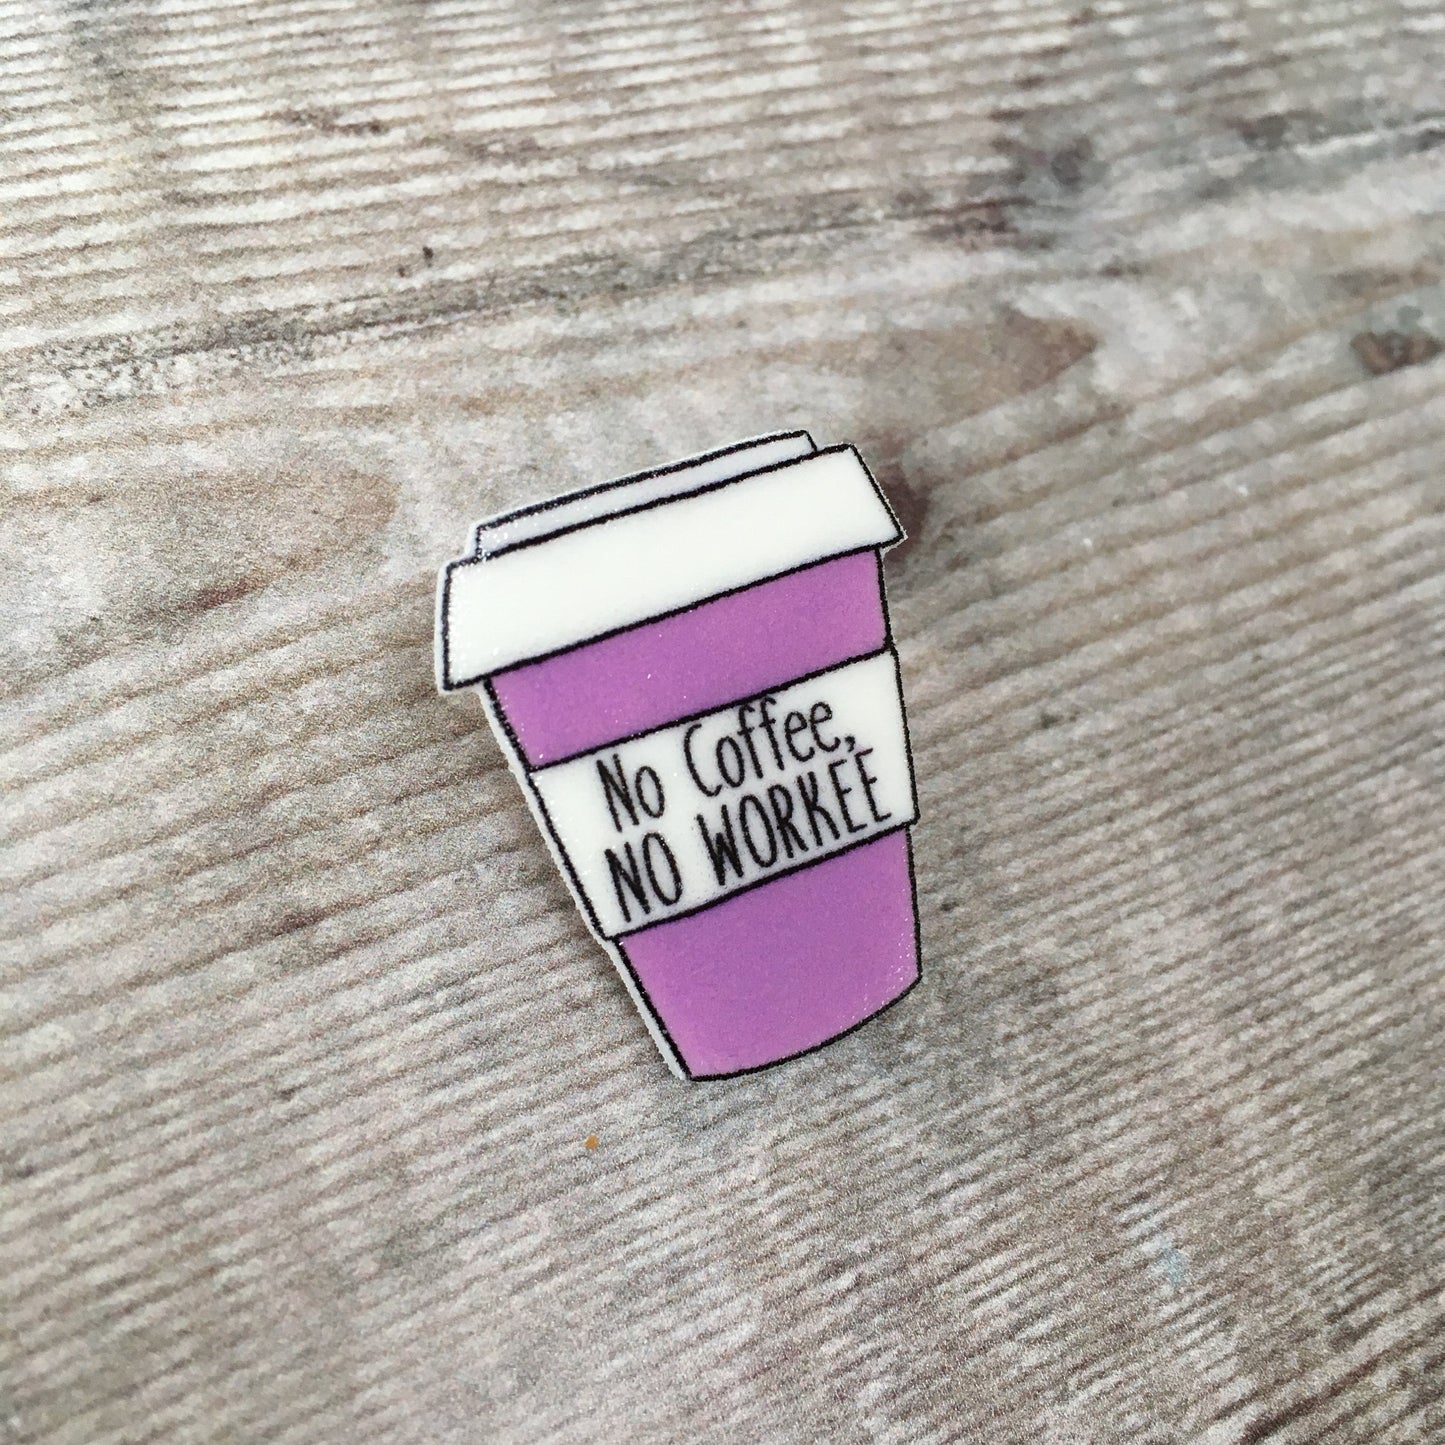 No coffee no workee coffee cup pin brooch